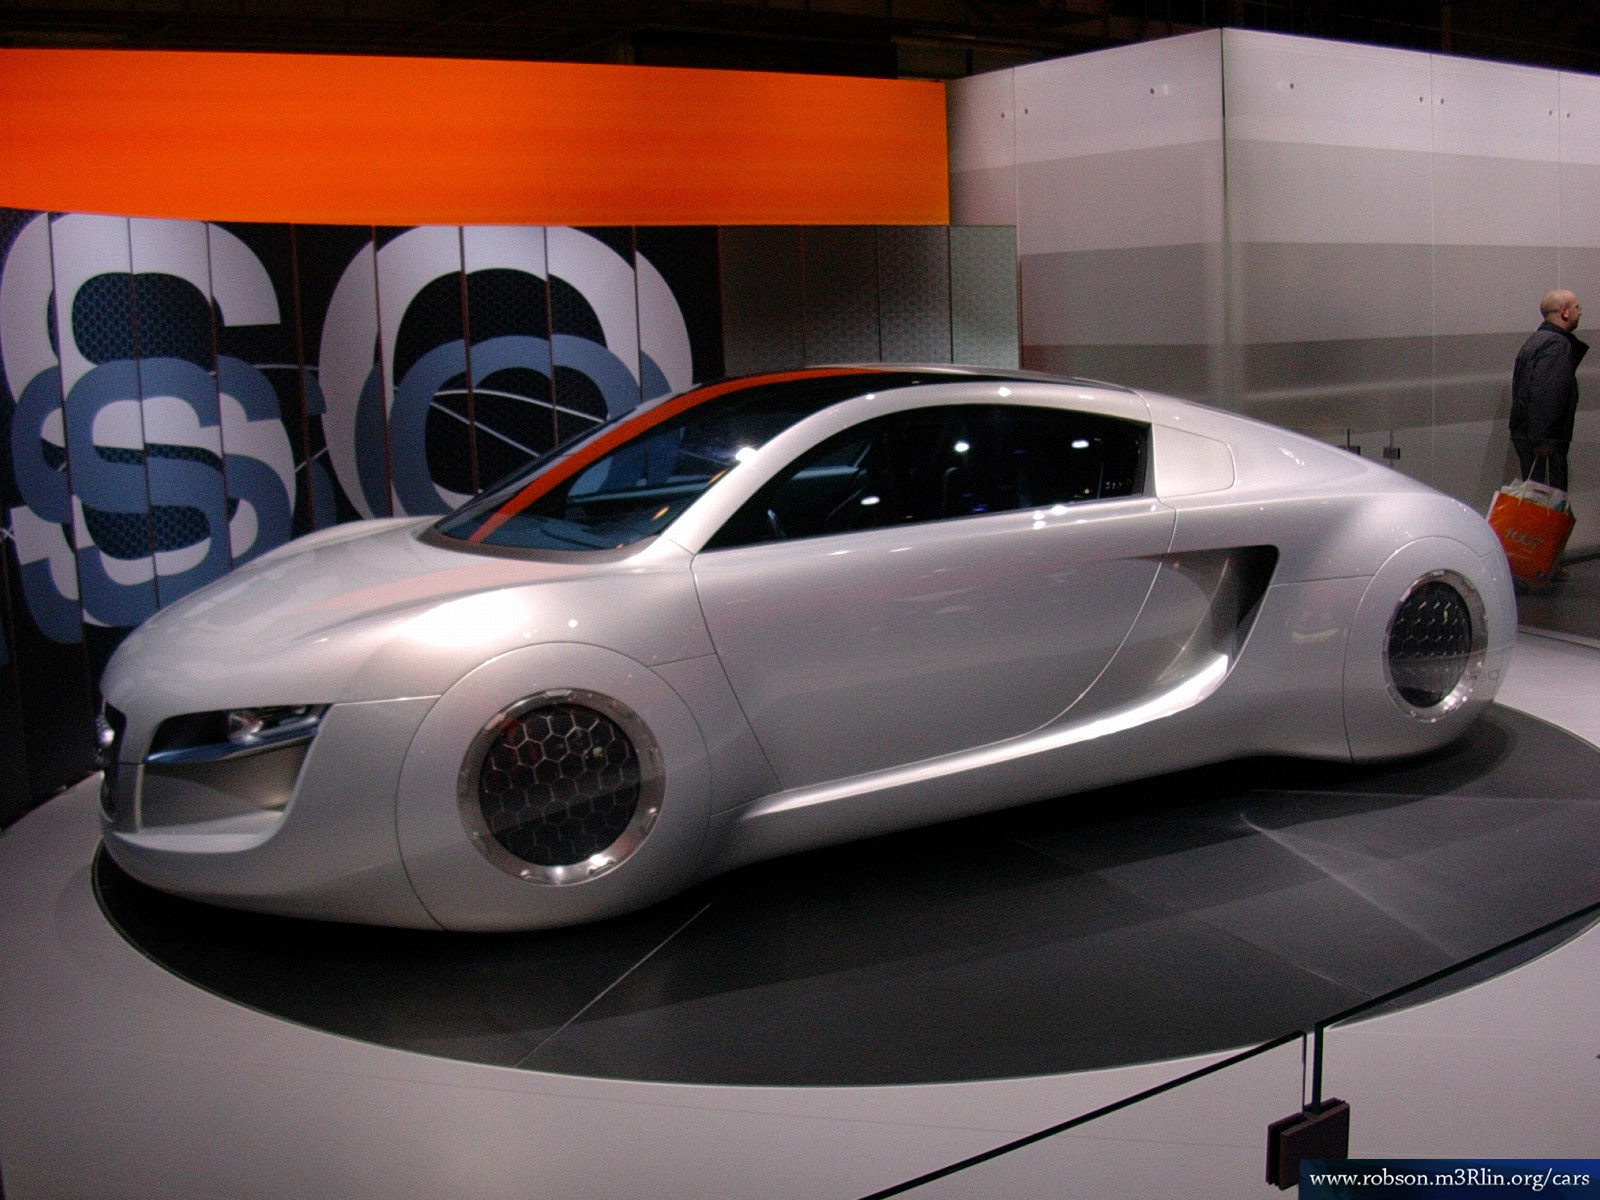 Slick Concept Cars and one air car